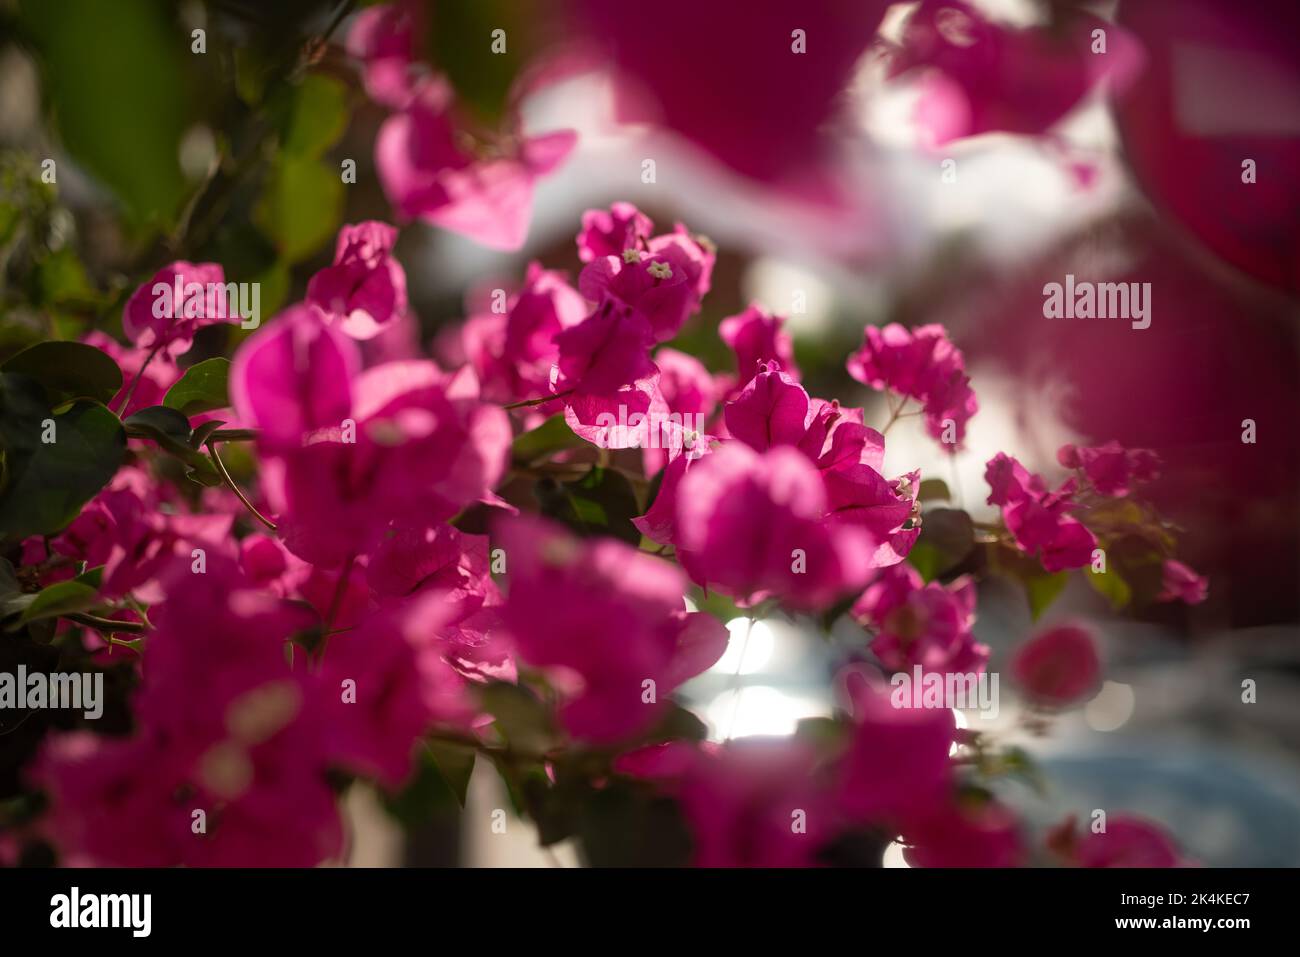 Mostly blurred and sunlit from behind pink Bougainvillea flowers closeup Stock Photo